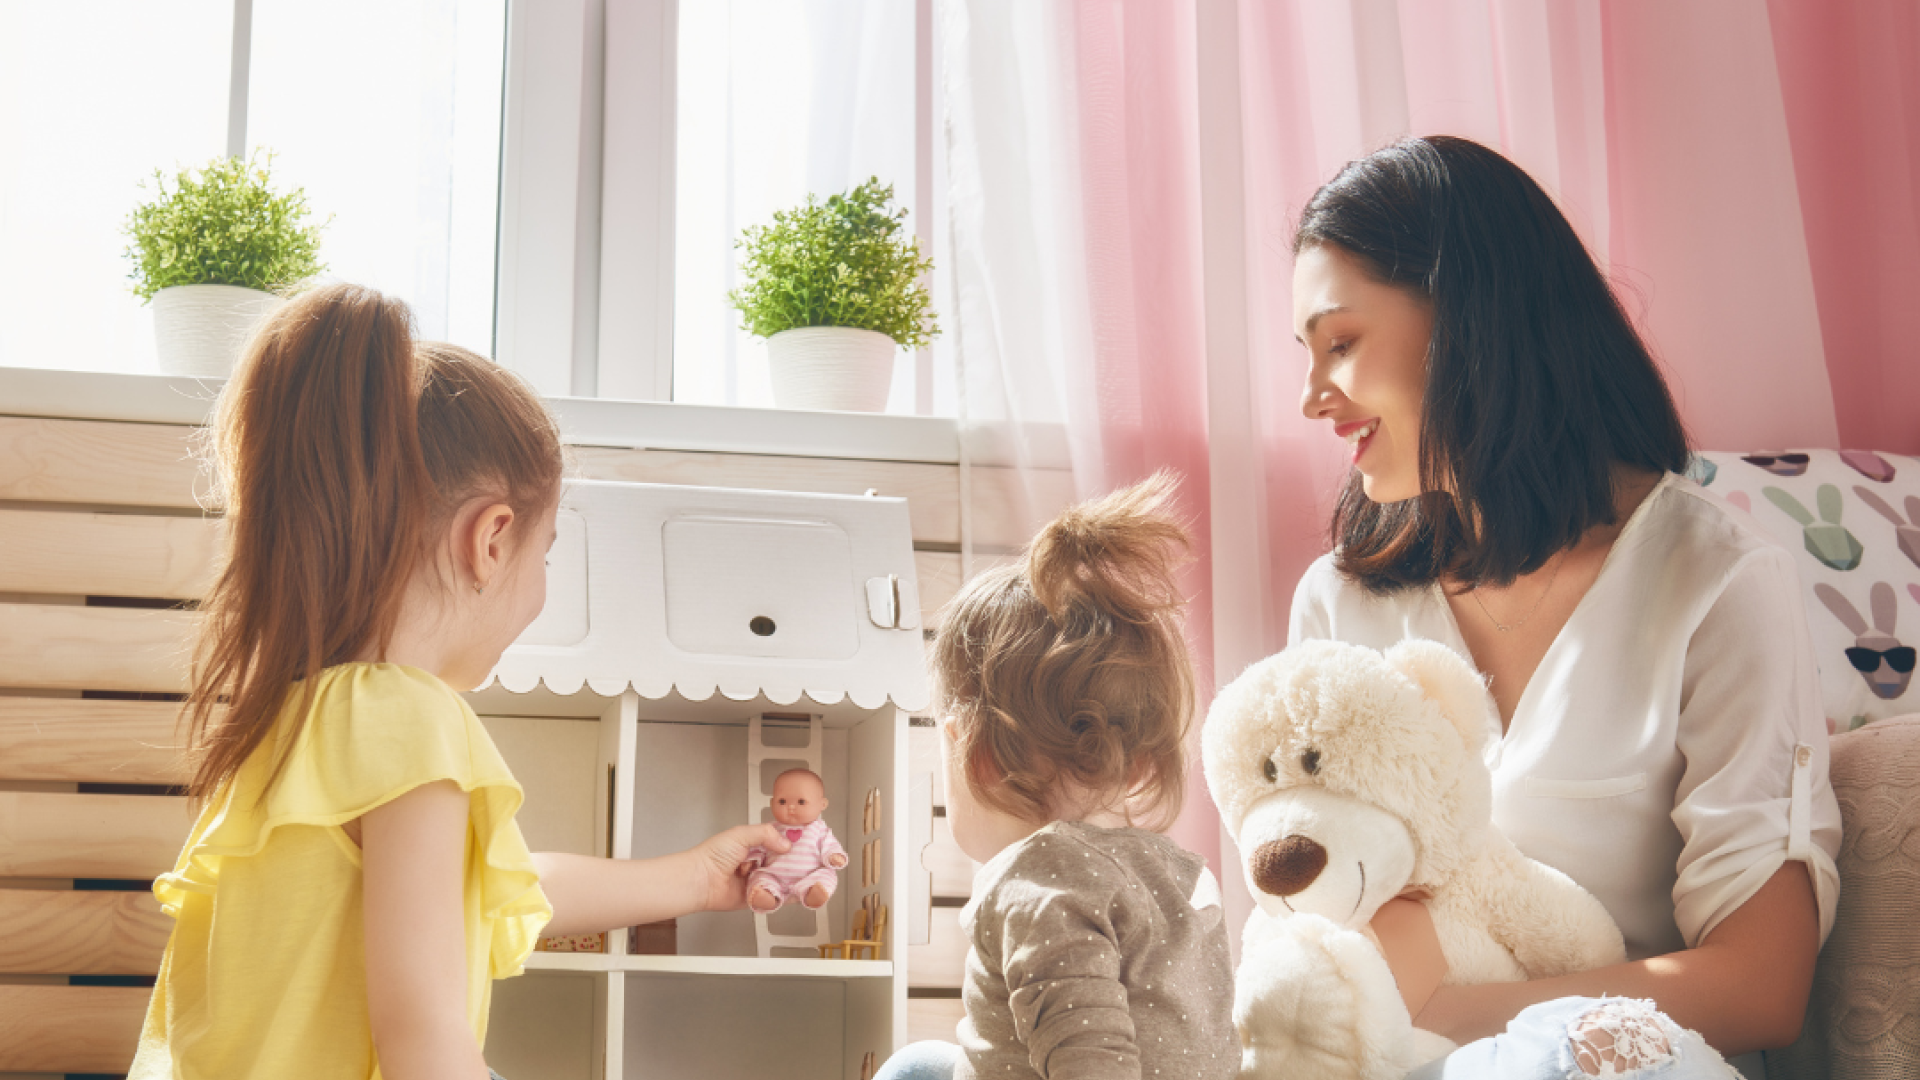 A woman and her two children play with a dollhouse and a teddy bear